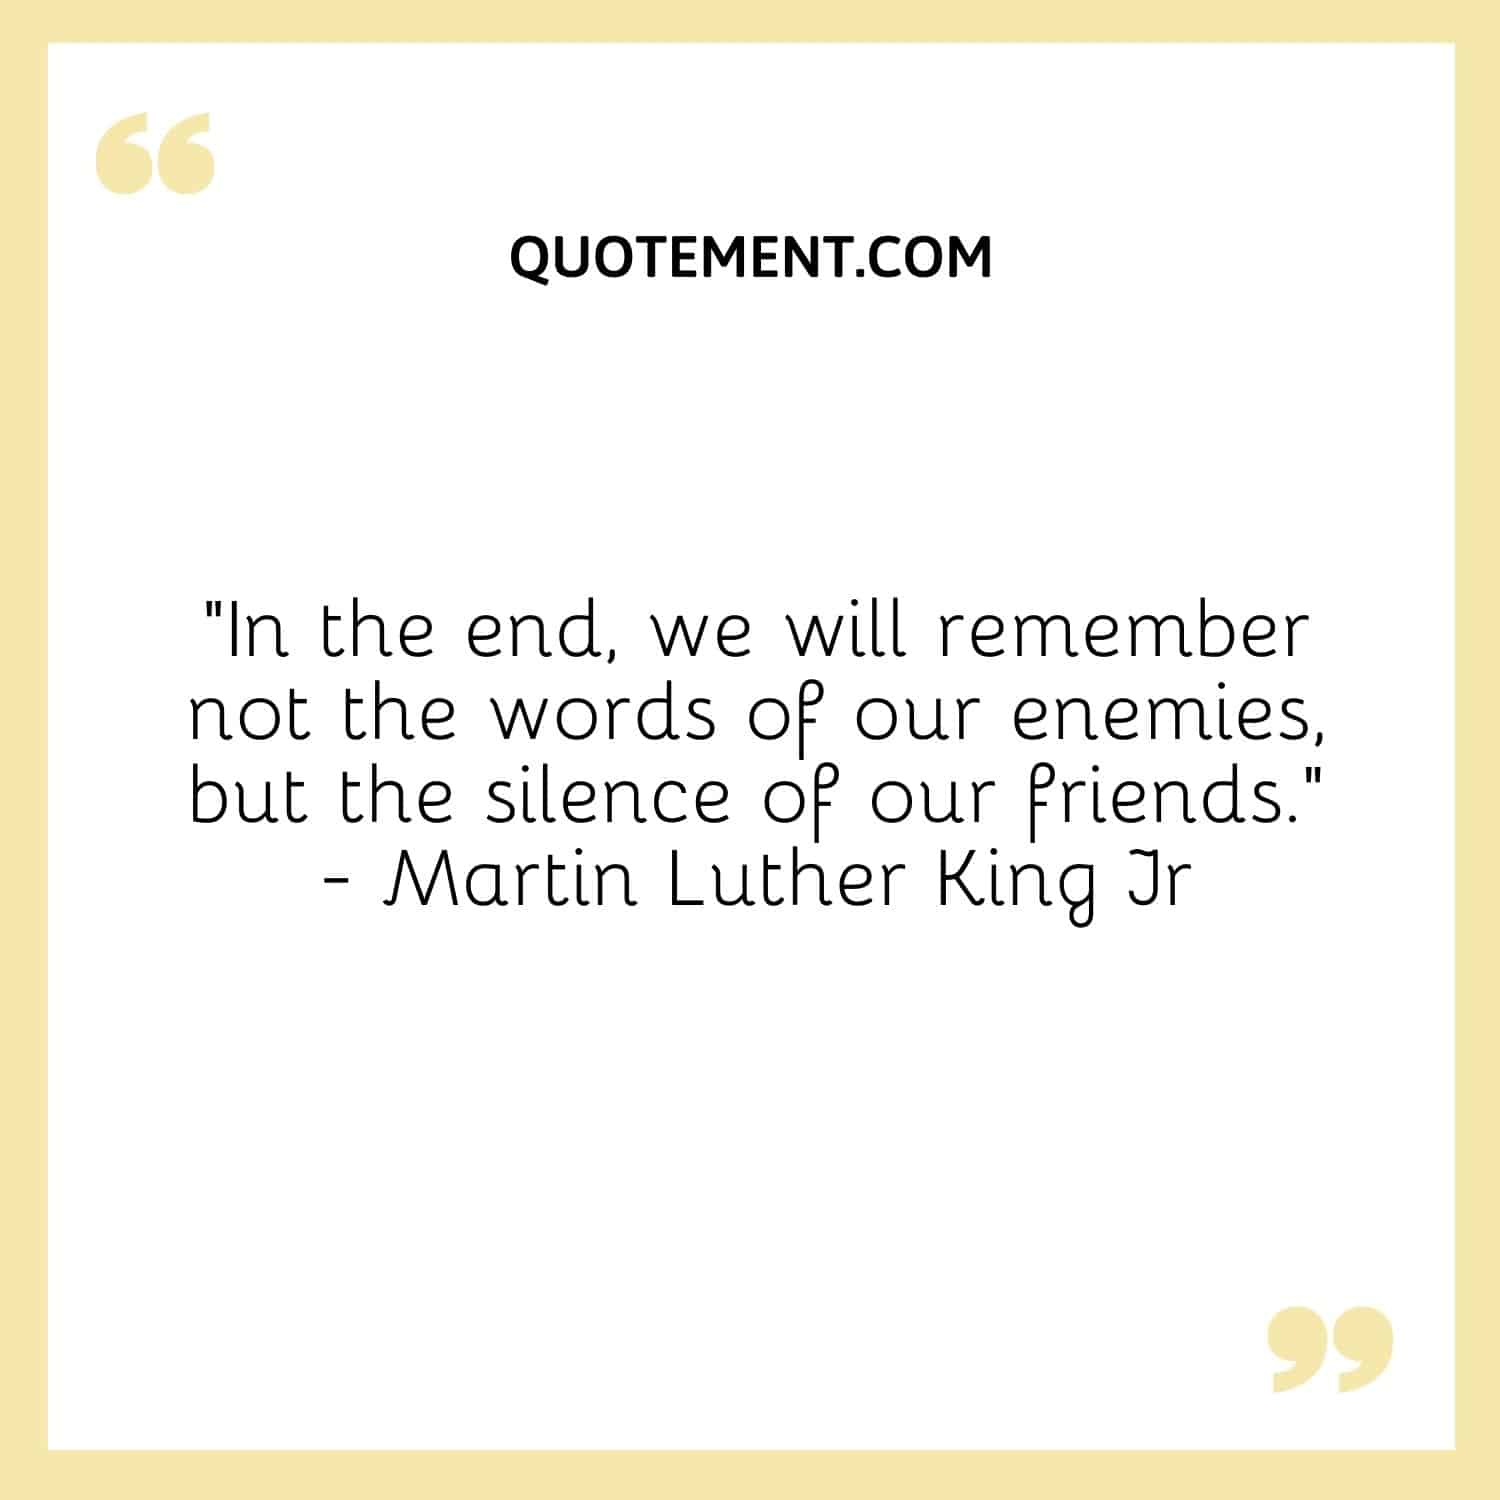 “In the end, we will remember not the words of our enemies, but the silence of our friends.” — Martin Luther King Jr